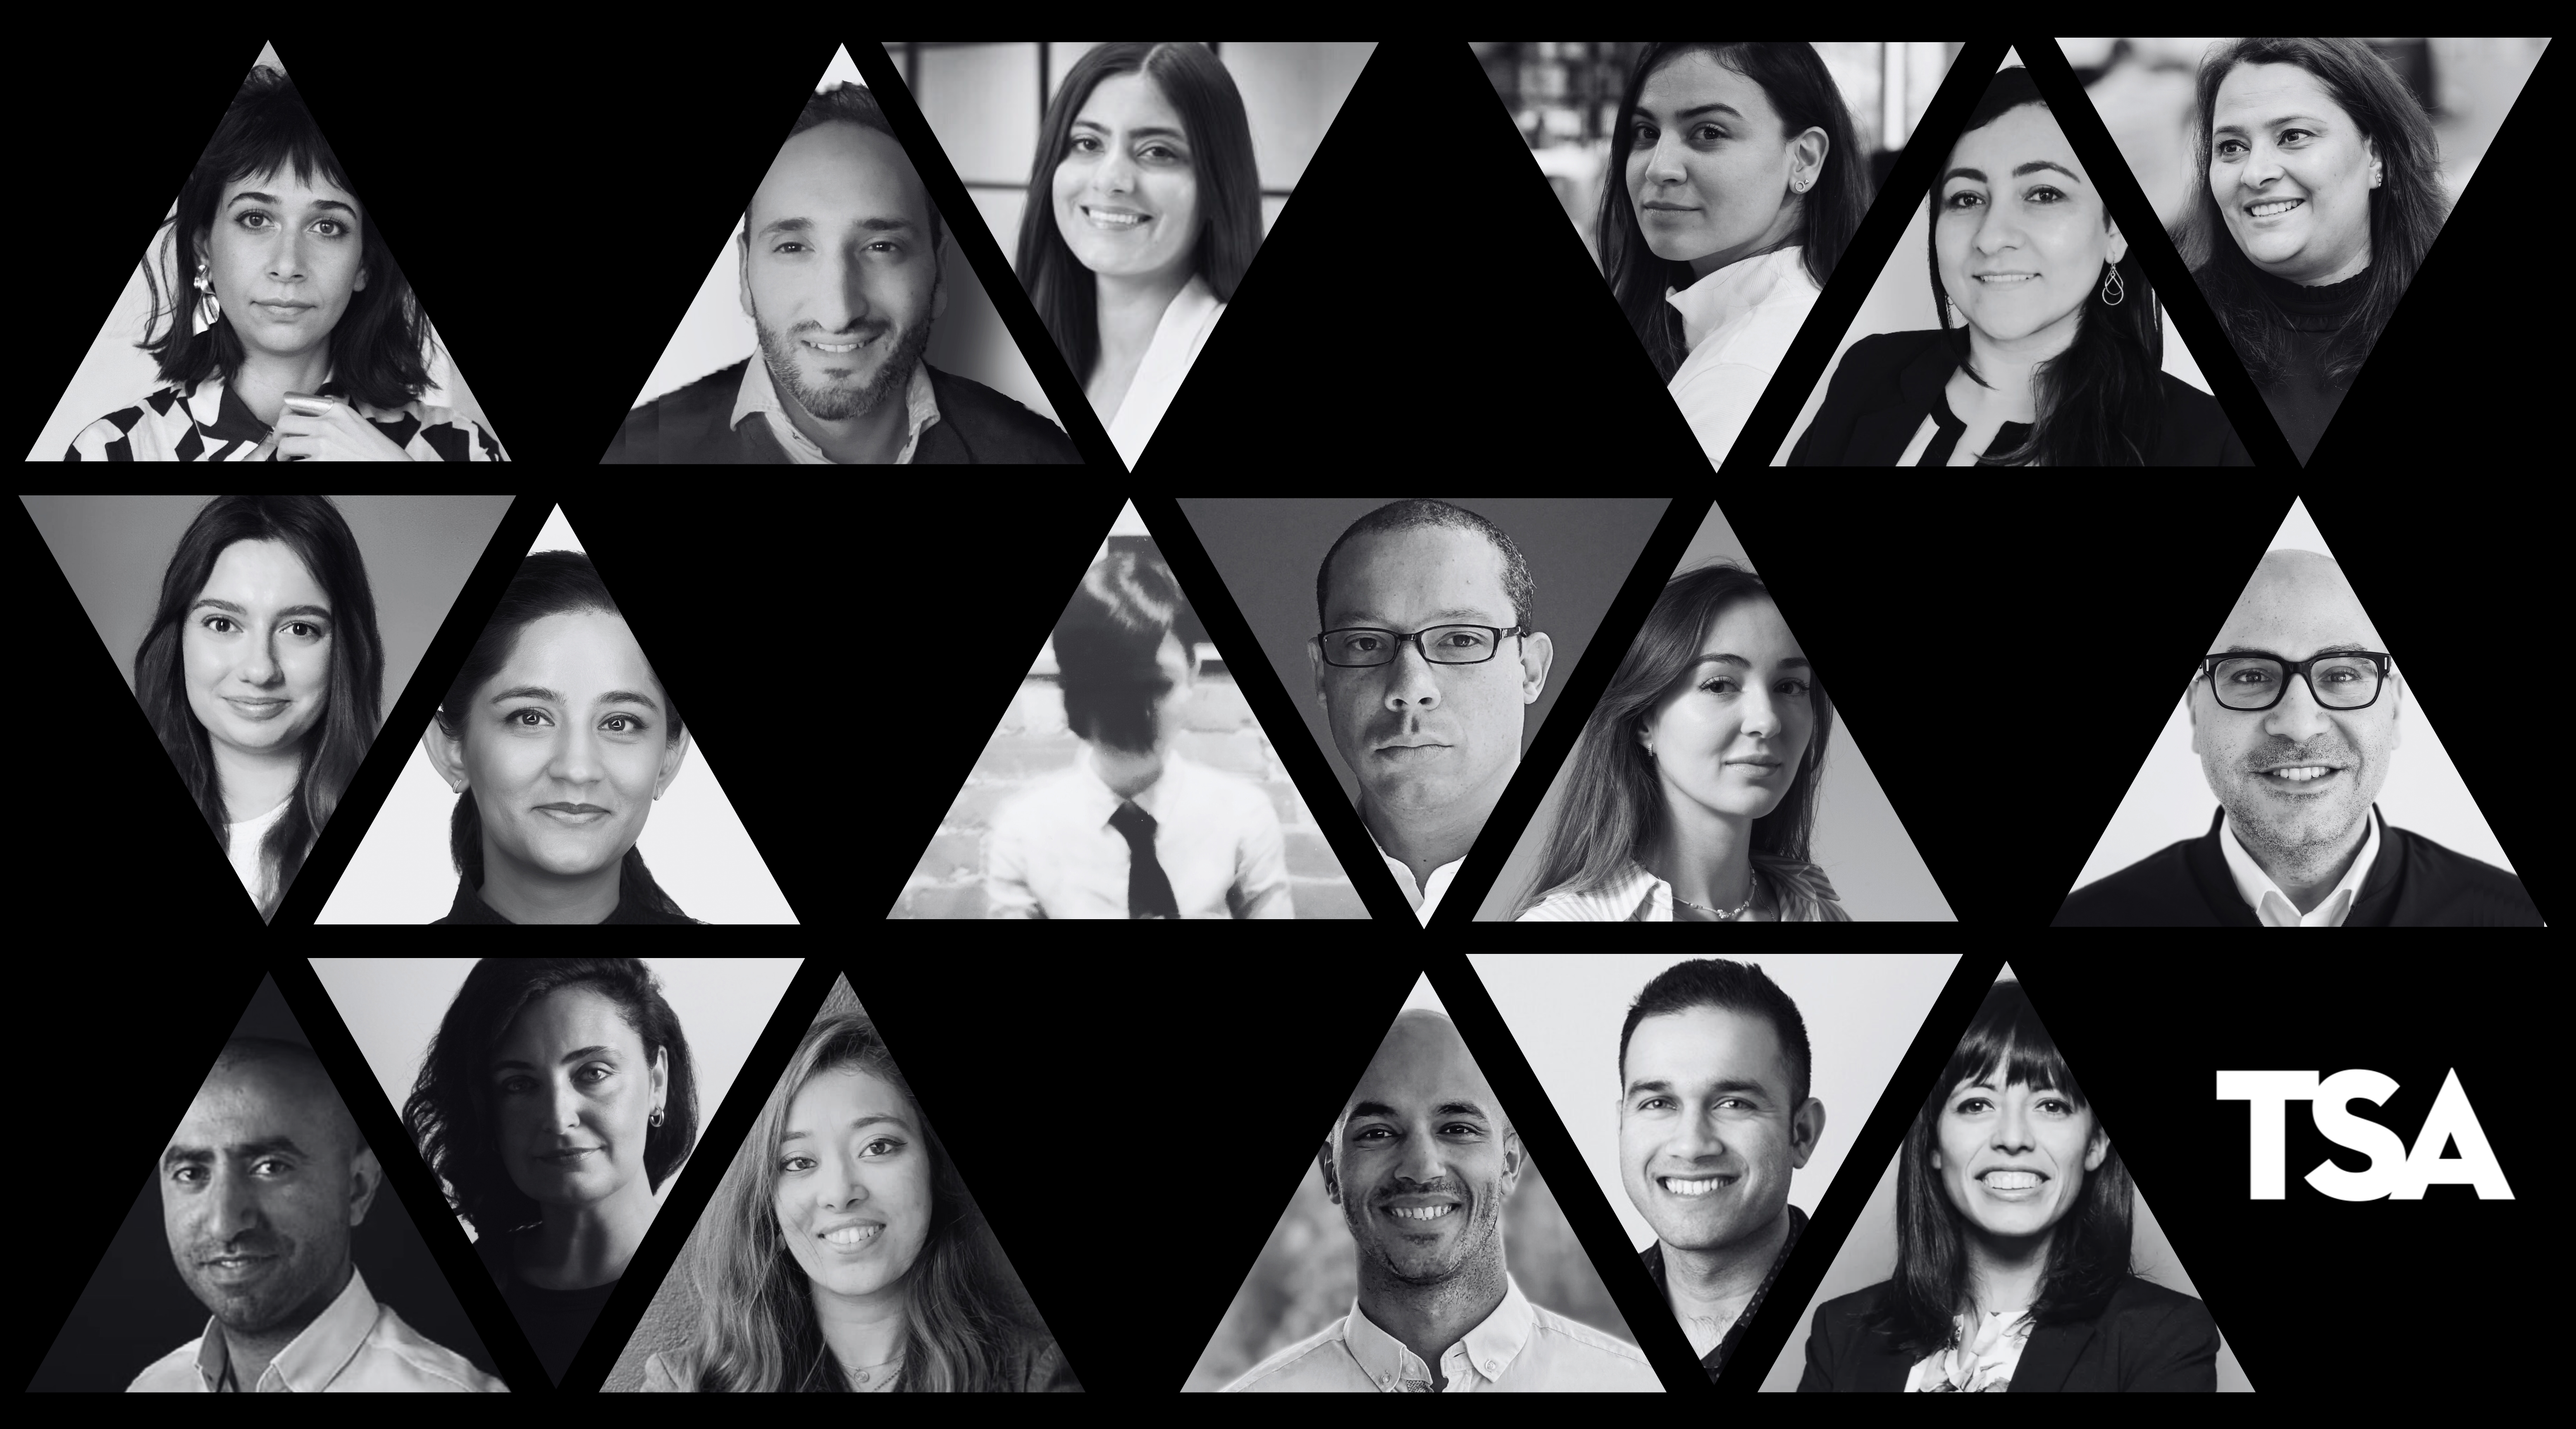 Event Banner with black & white headshots of all this session's Featured Guests arranged in a pattern.